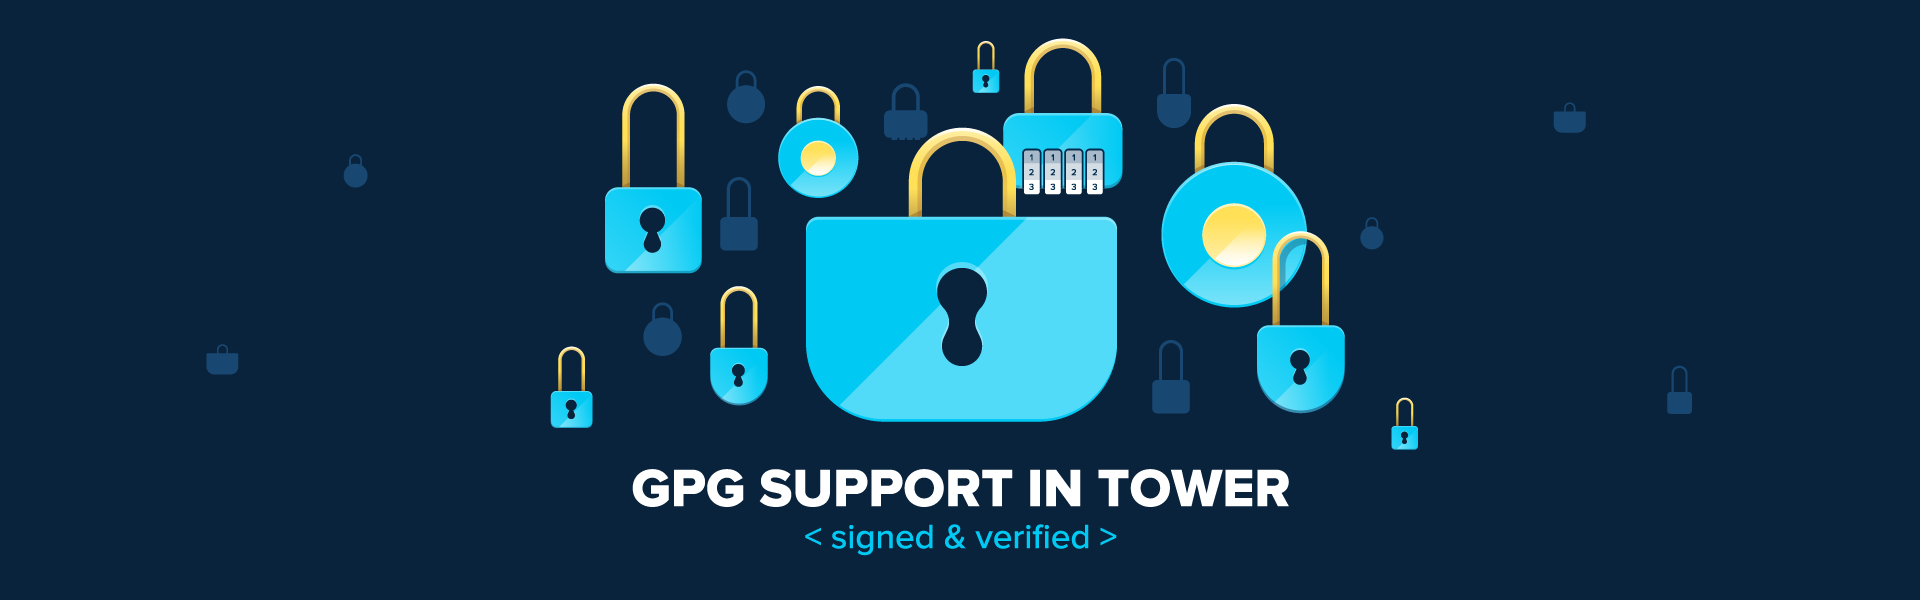 New in Tower: GPG Support